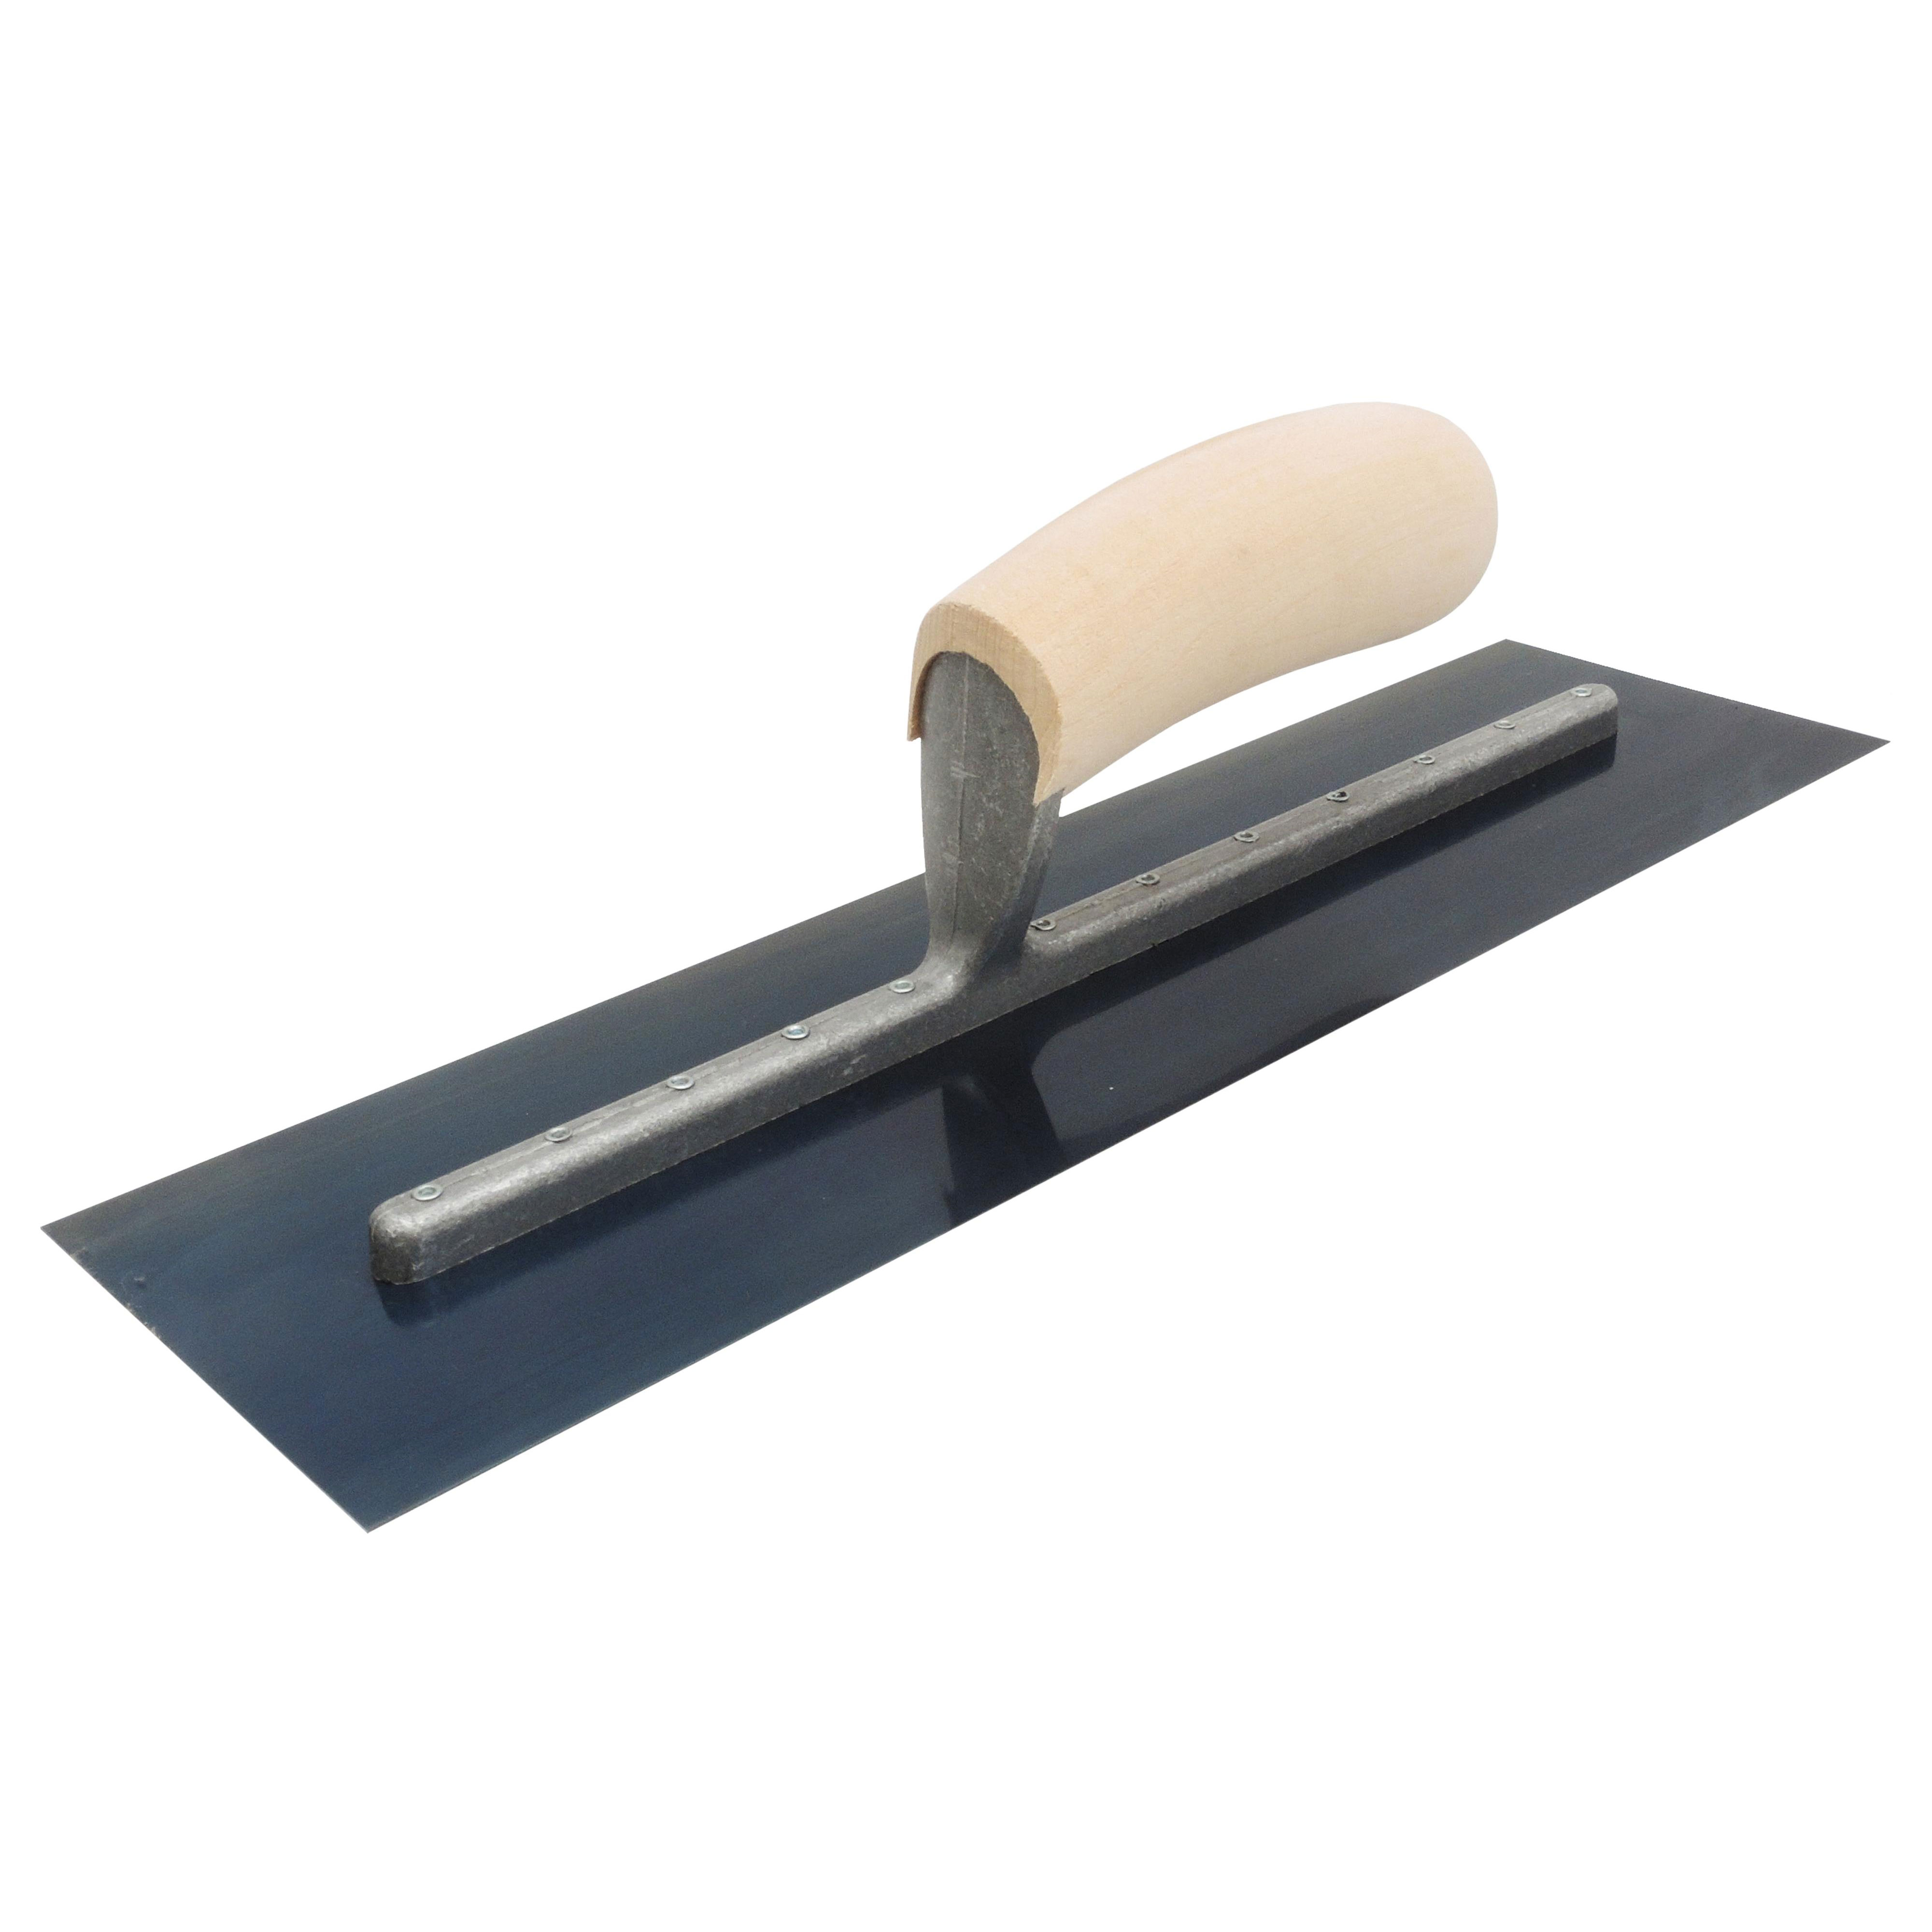 Marshalltown FT204B 20in x 4in Blue Steel Finishing Trowel with Wood Handle FT204B